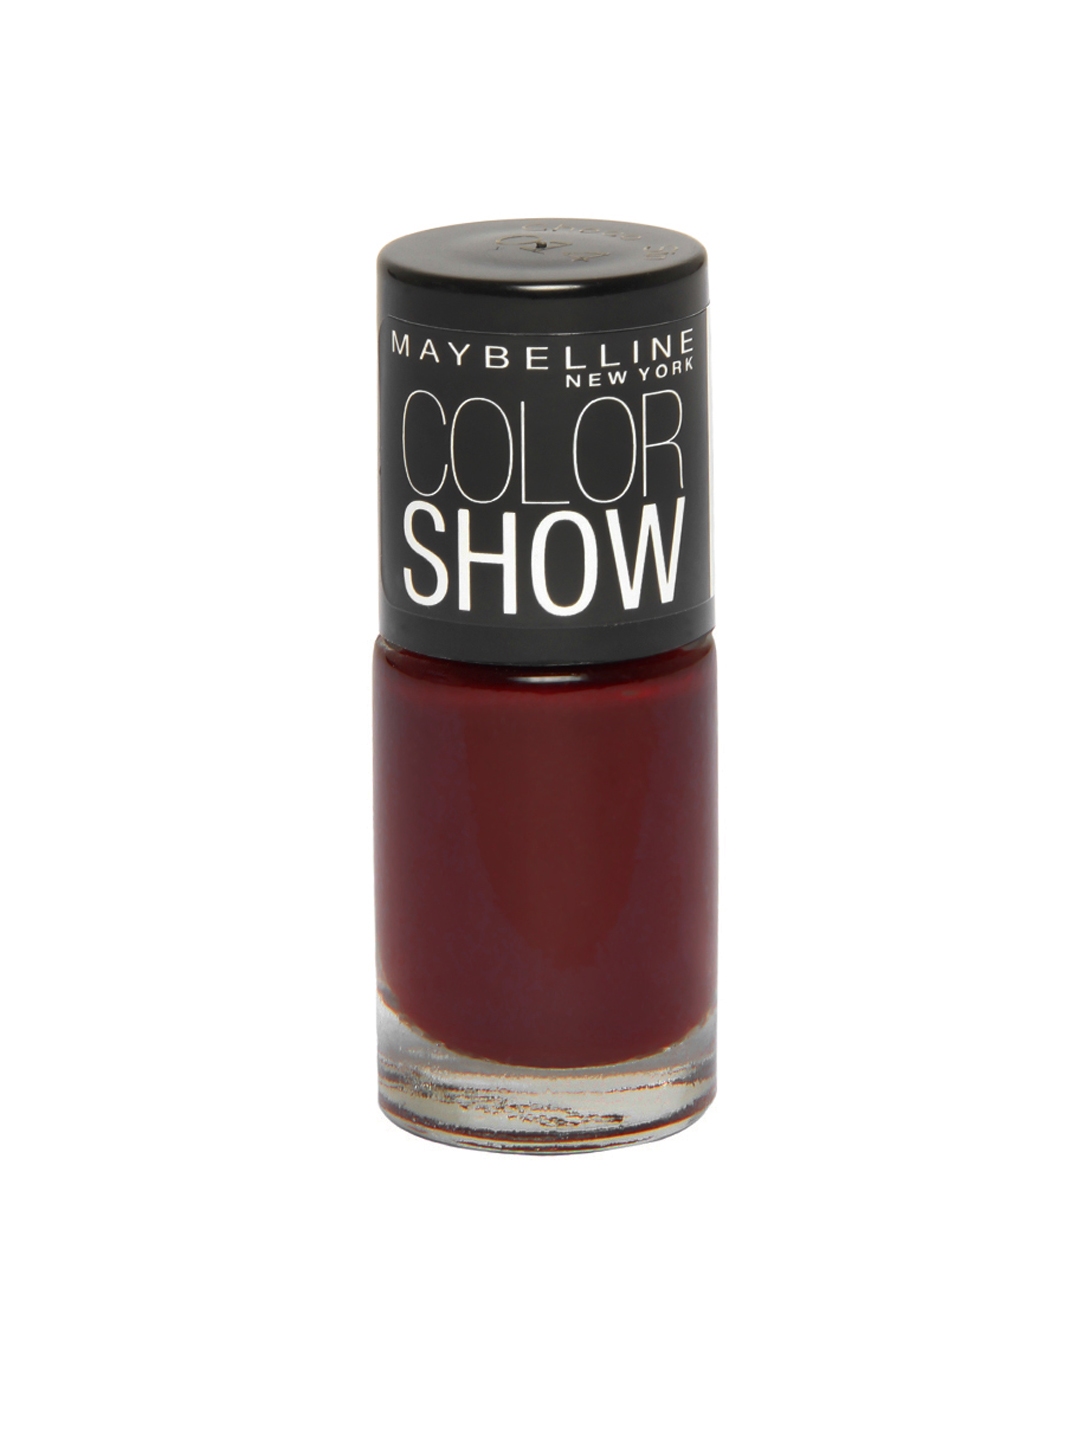 Maybelline New York Color Show Nail Lacquer Blue Freeze 023 Fluid Ounce   Amazonin Beauty